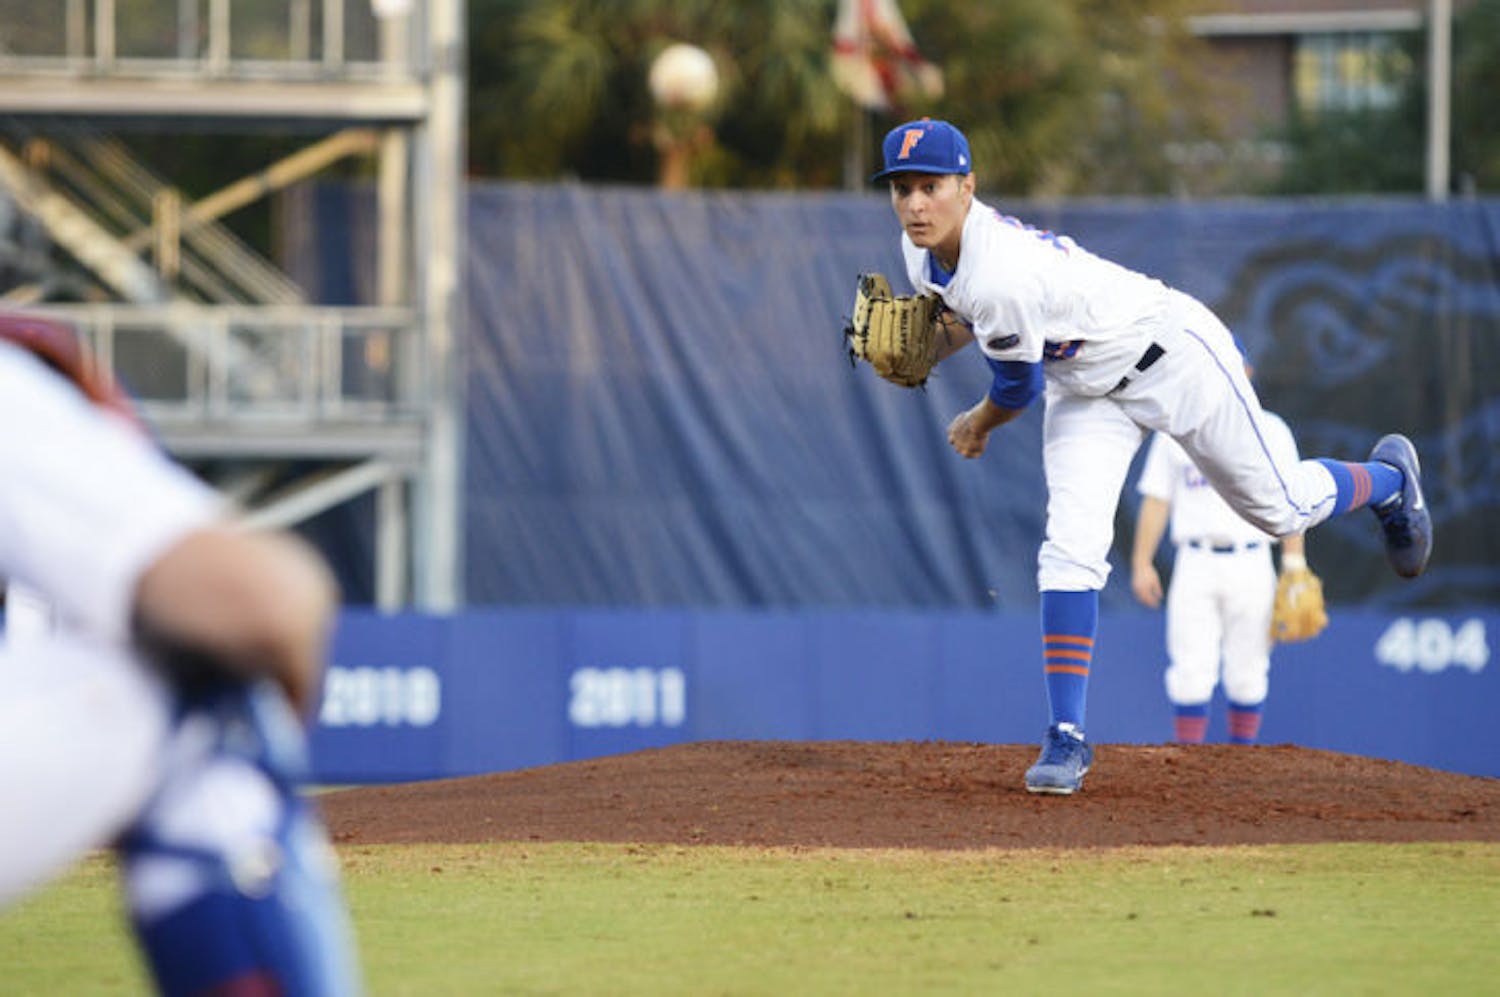 Left-handed pitcher Danny Young (15) warms up between innings during Florida’s 4-1 loss to Florida State on March 12 at McKethan Stadium. The freshman allowed two hits in four innings against the Seminoles on Tuesday night.